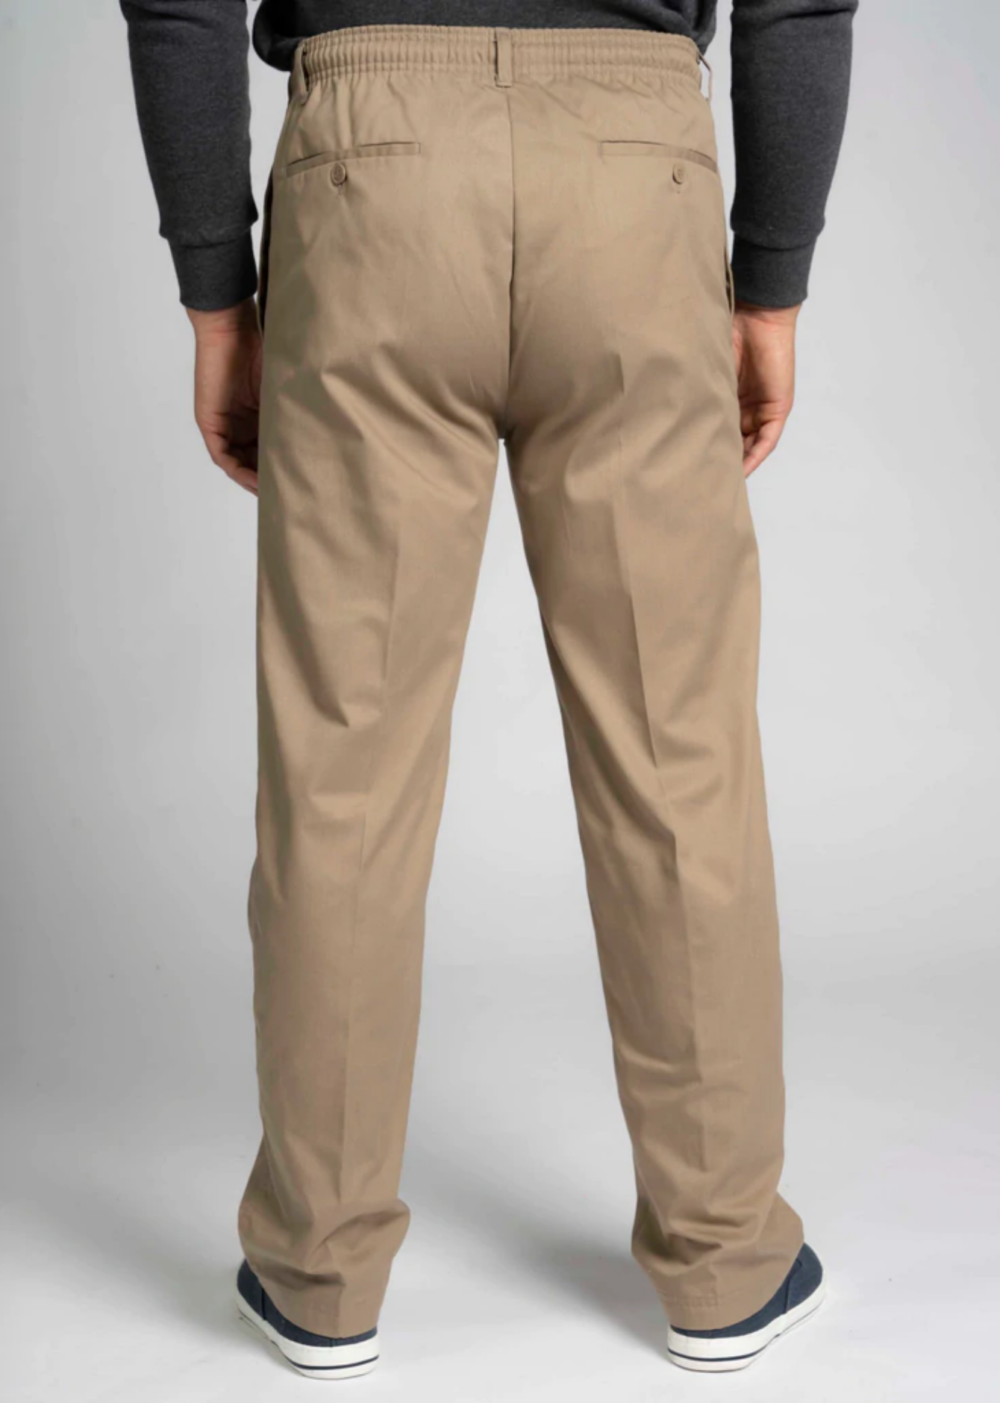 Mens Elastic Waist Pants For Seniors or the Disabled  Silverts  Silverts